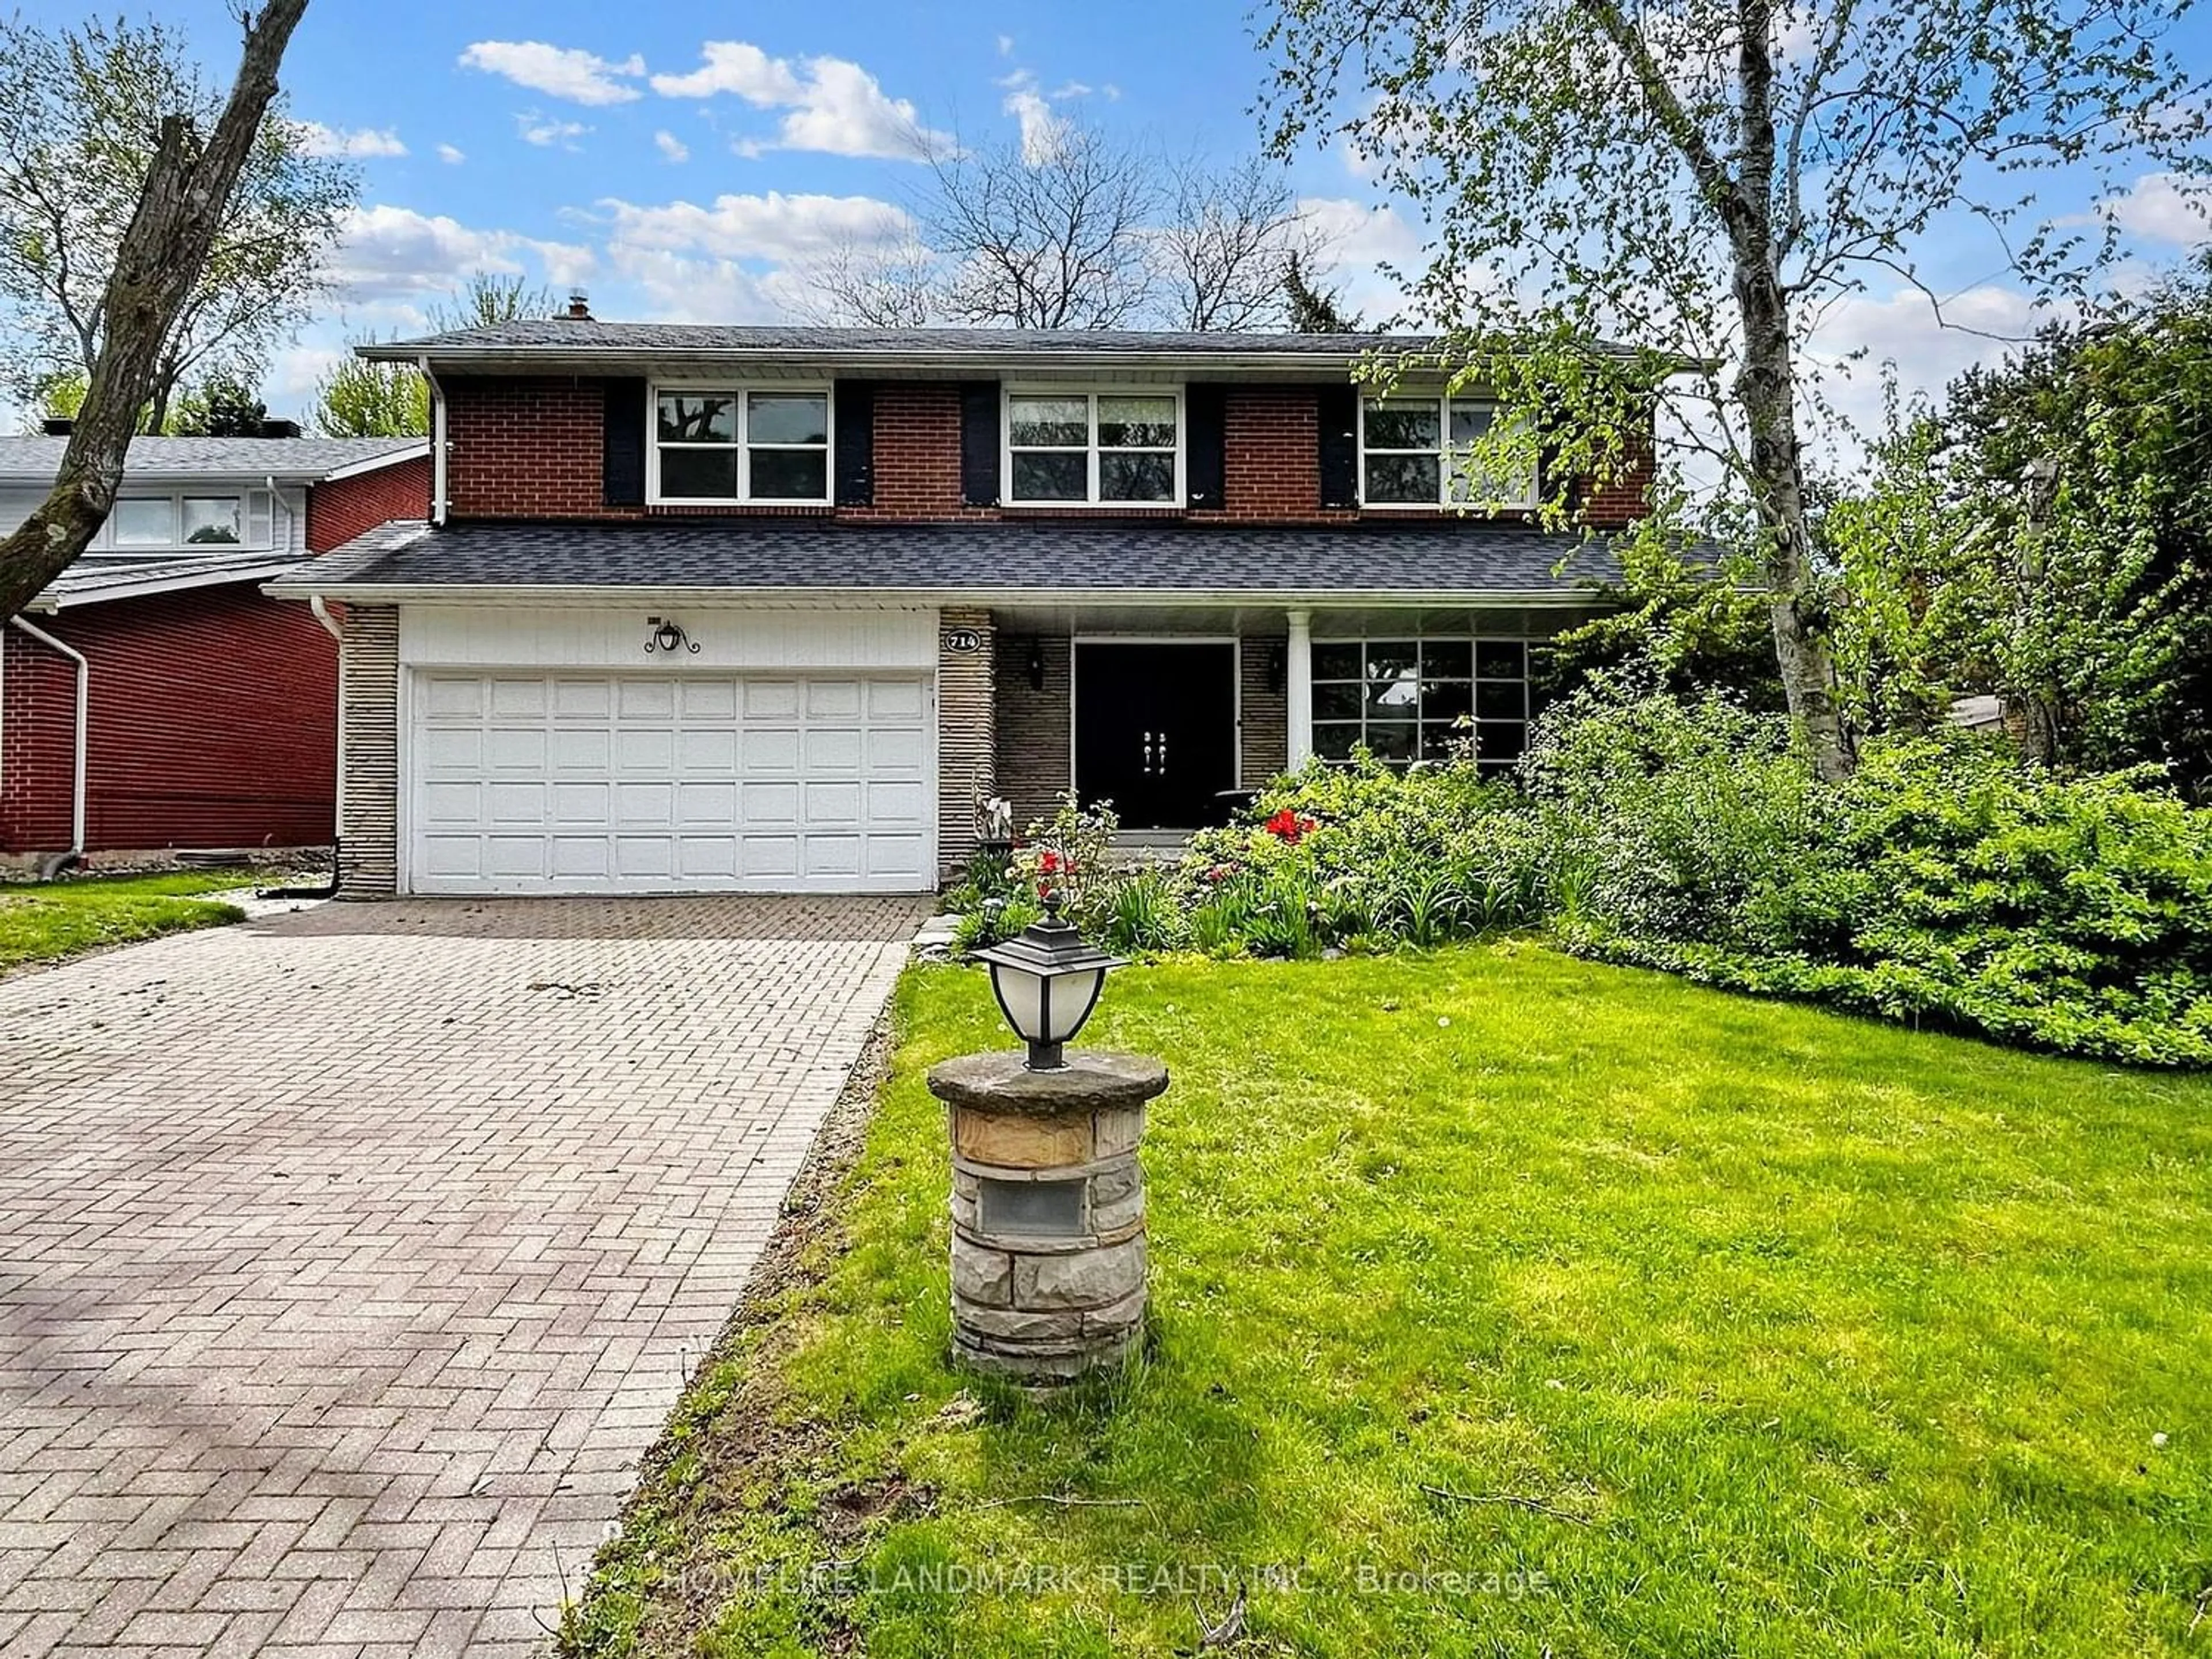 Home with brick exterior material for 714 Conacher Dr, Toronto Ontario M2M 3N6